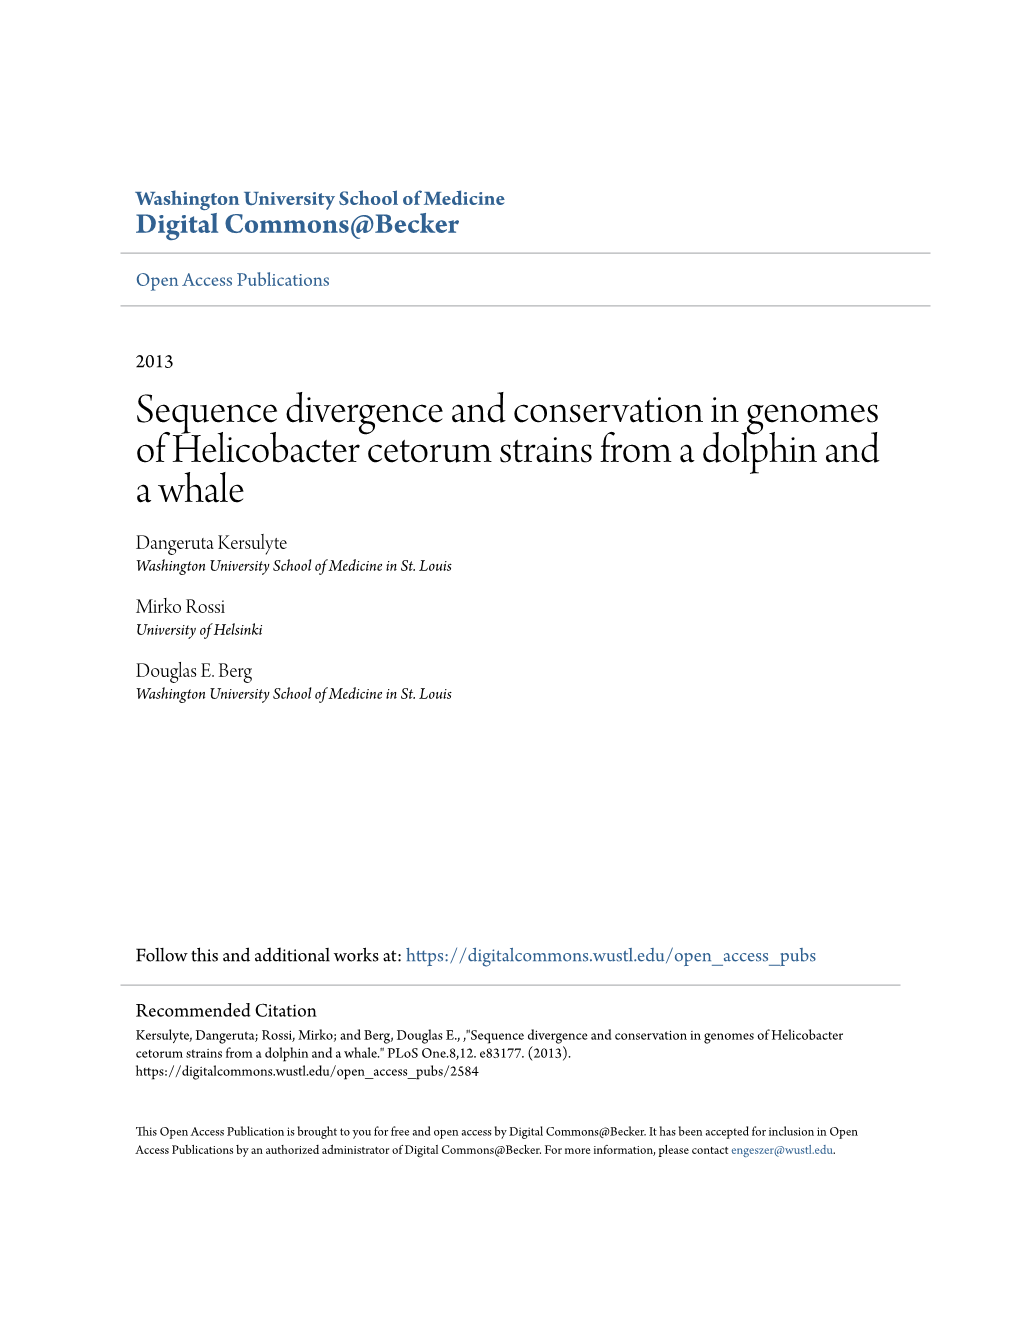 Sequence Divergence and Conservation in Genomes Of